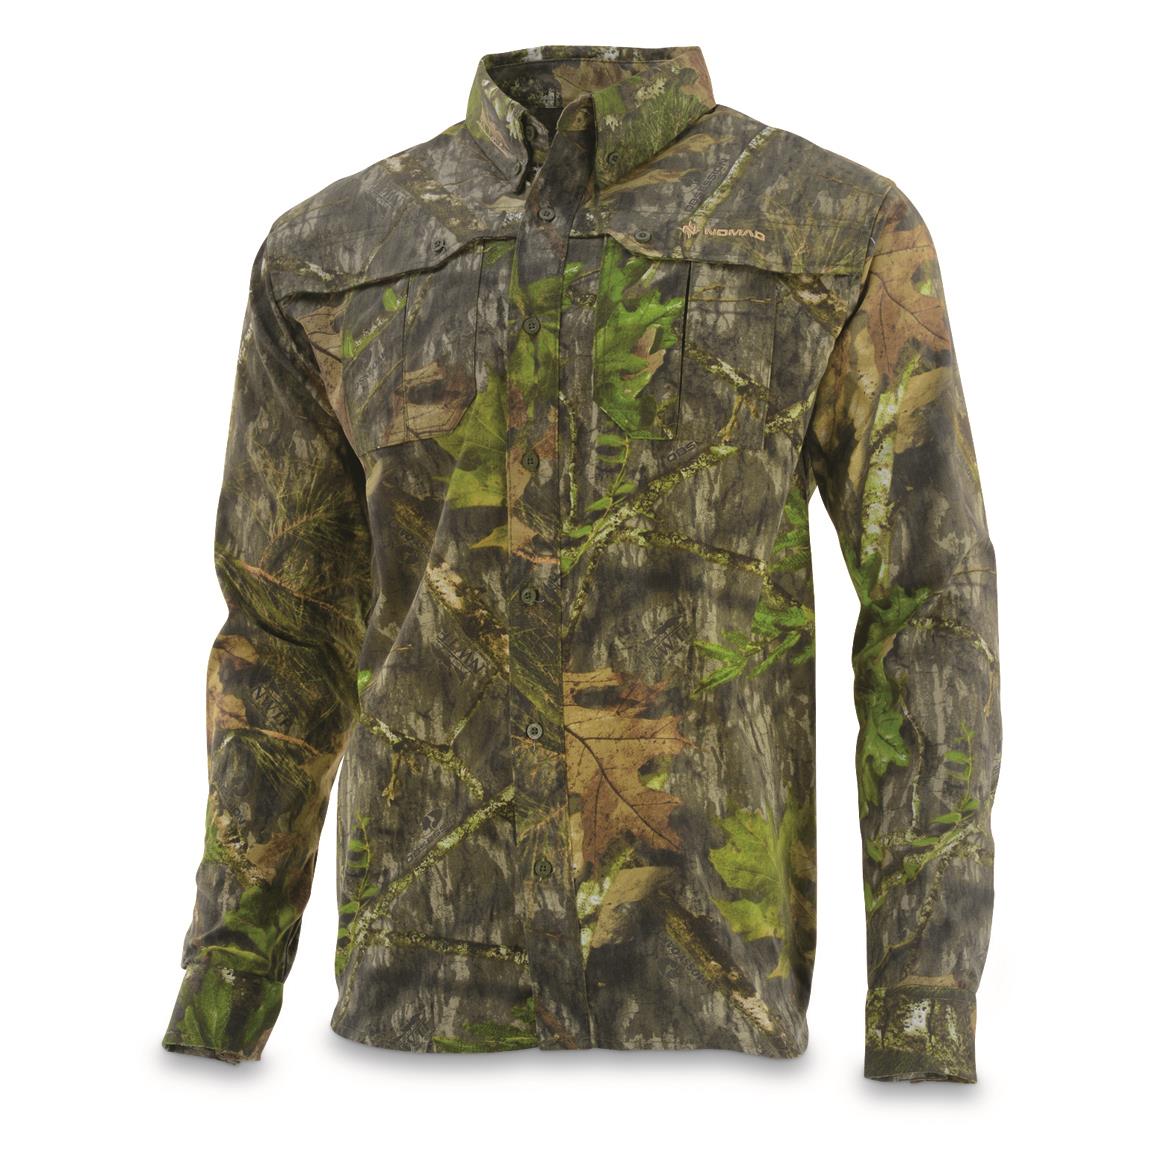 Ideal for warm-weather hunting, Mossy Oak Obsession®